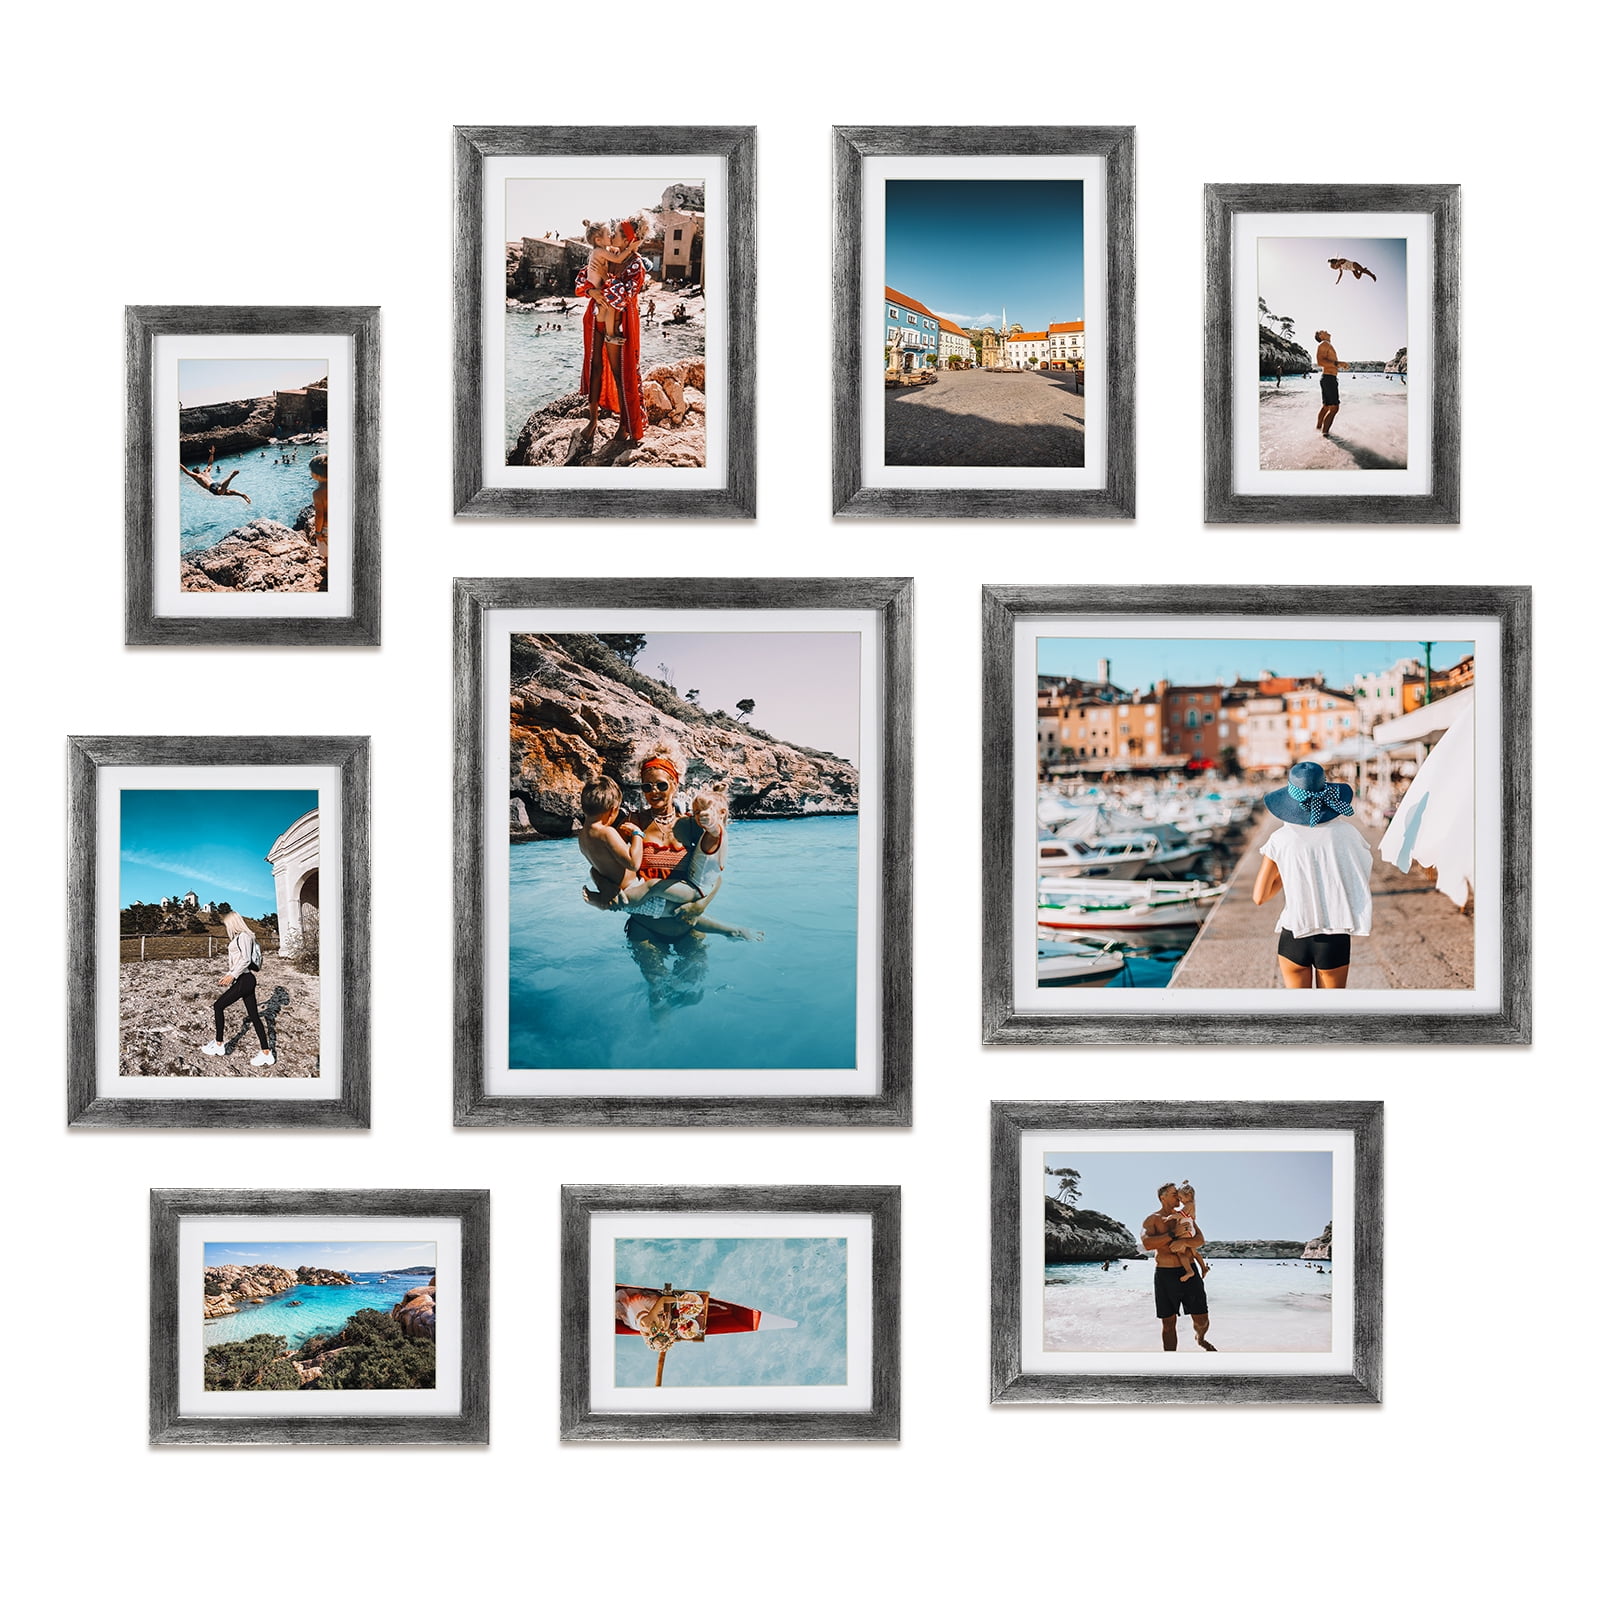 Gallery Set of 10 Picture Frames with Mats, Modern Contemporary Style, Multi-Size Frames, Maestro Collection, Silver(Four-4x6+Four-5x7+Tow8x10)